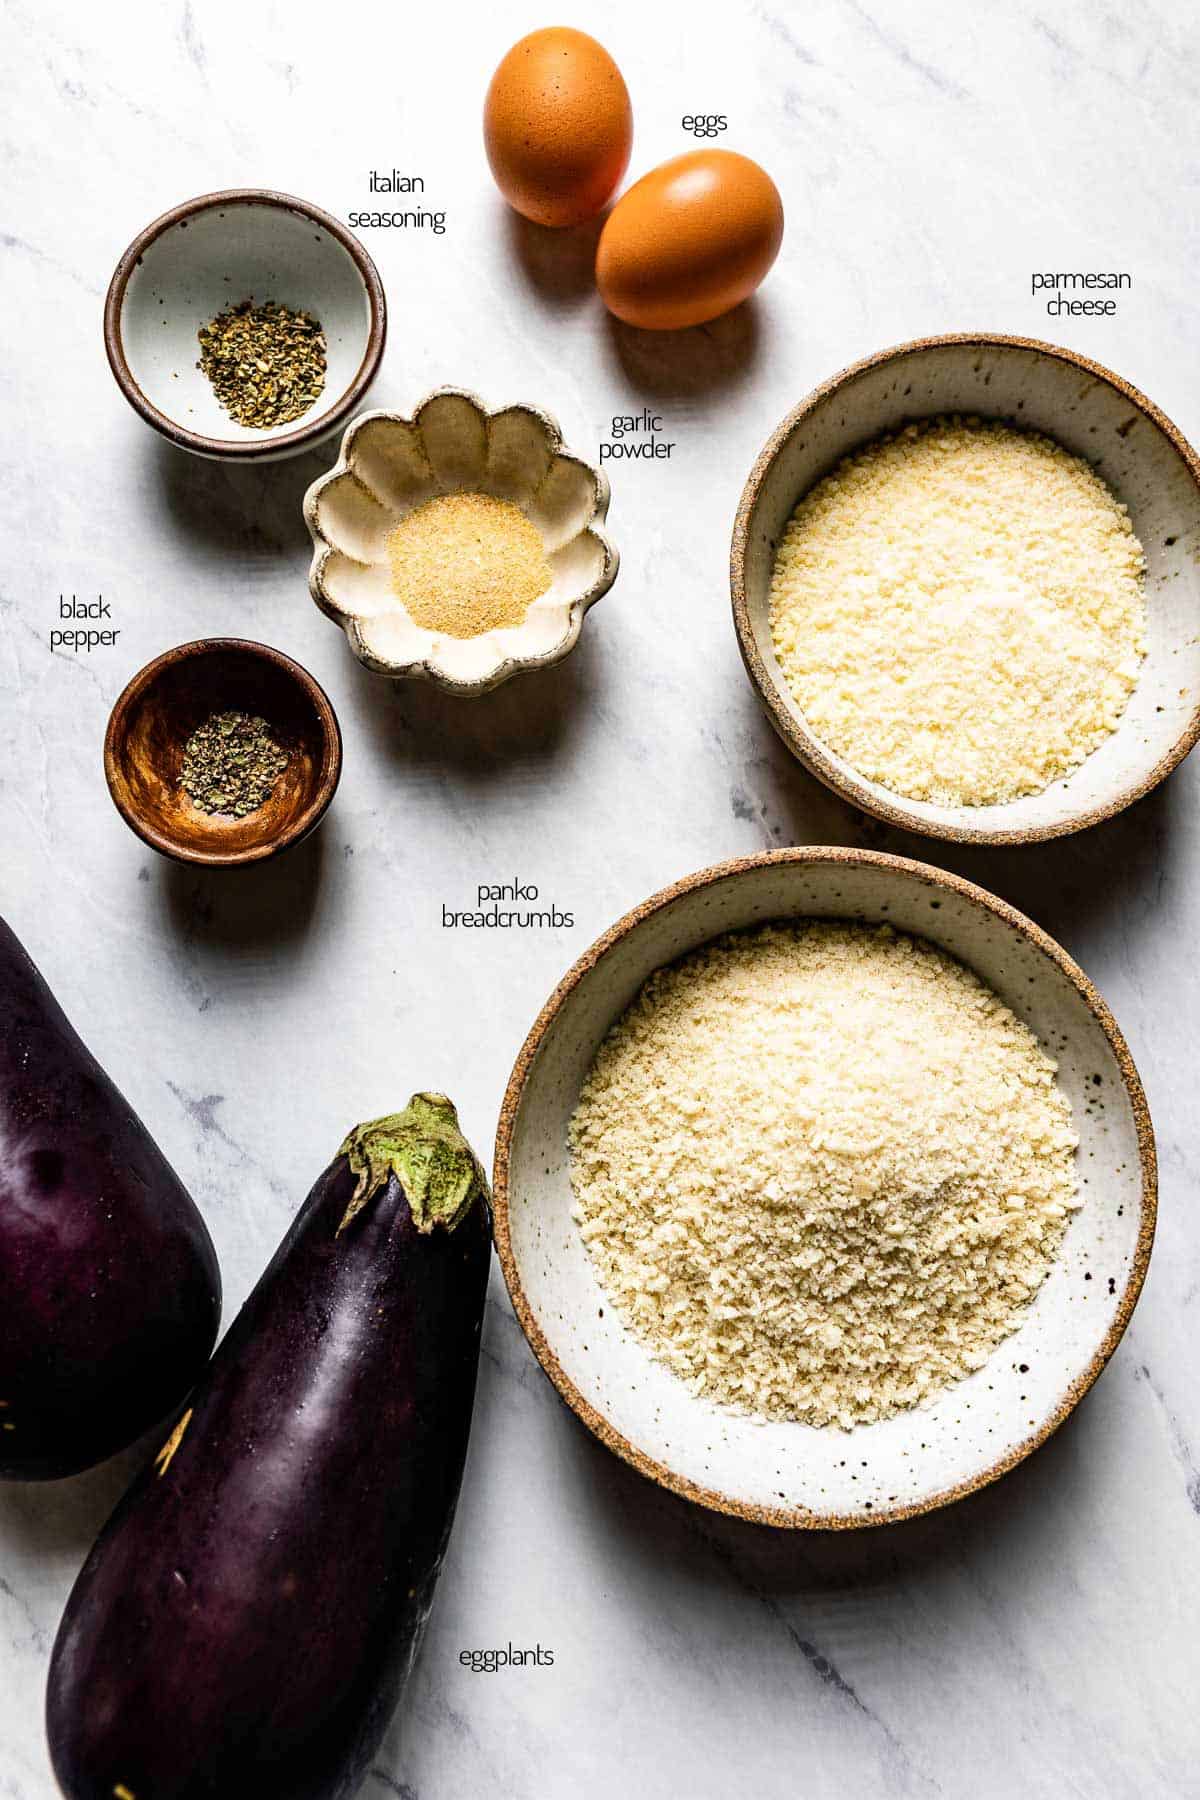 Ingredients for crispy slices of eggplant with breadcrumbs.